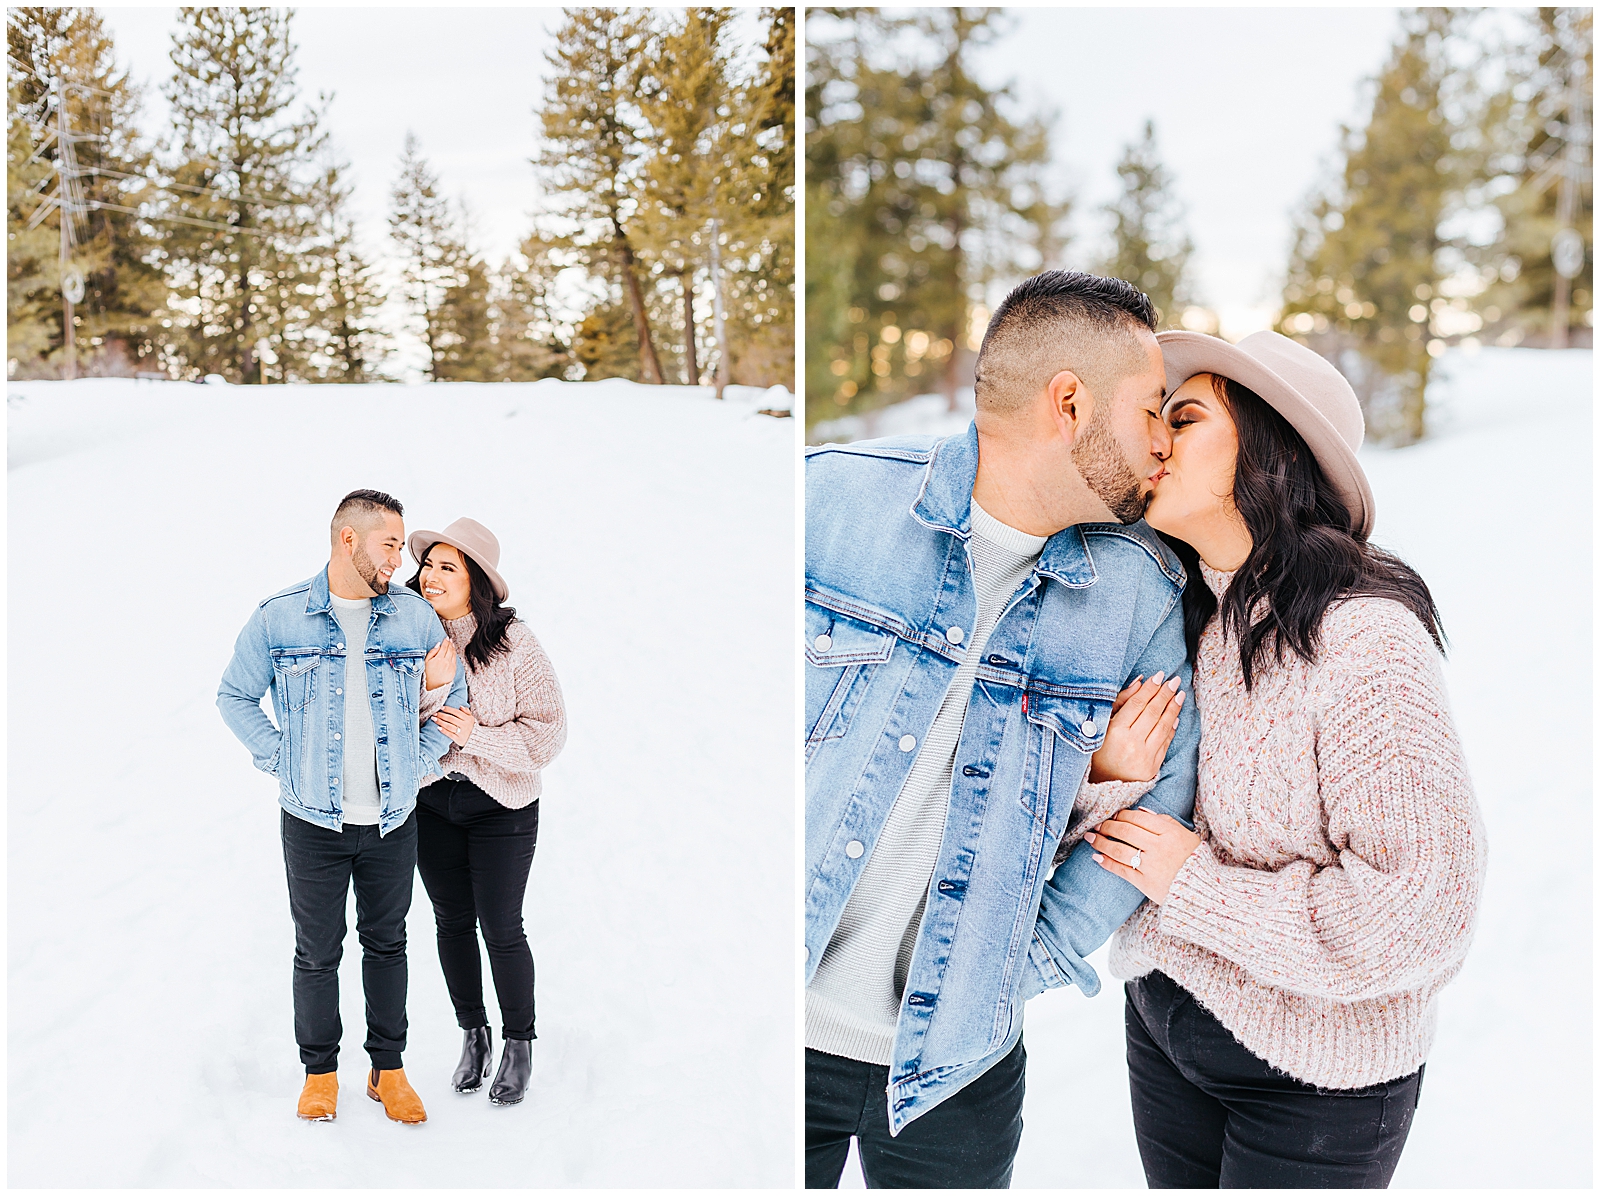 Dreamy Winter Engagement in the Snow near Boise Idaho